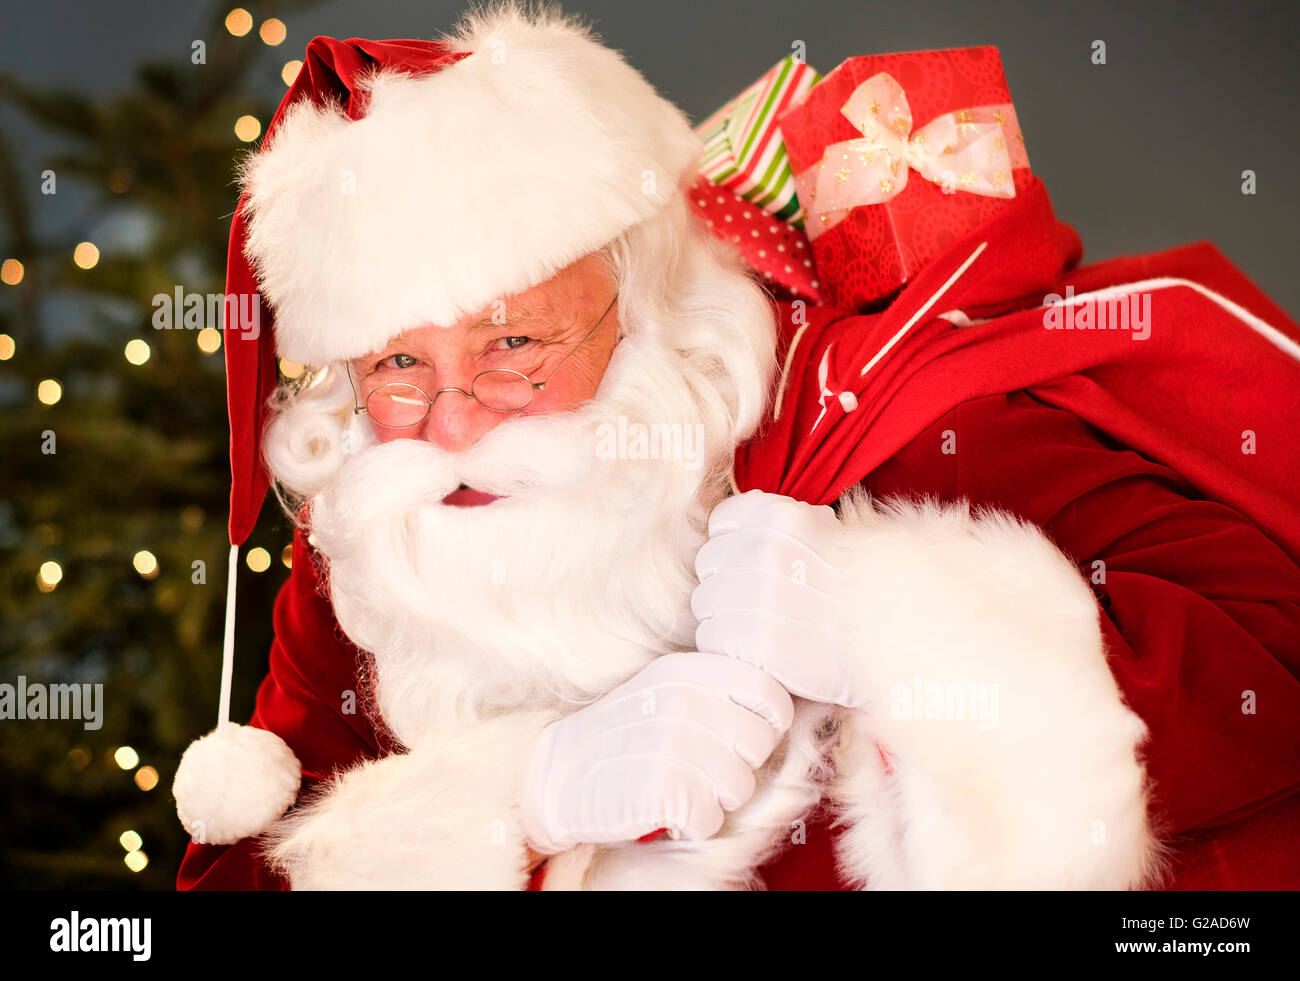 Portrait of Santa Claus carrying sack over shoulder Stock Photo